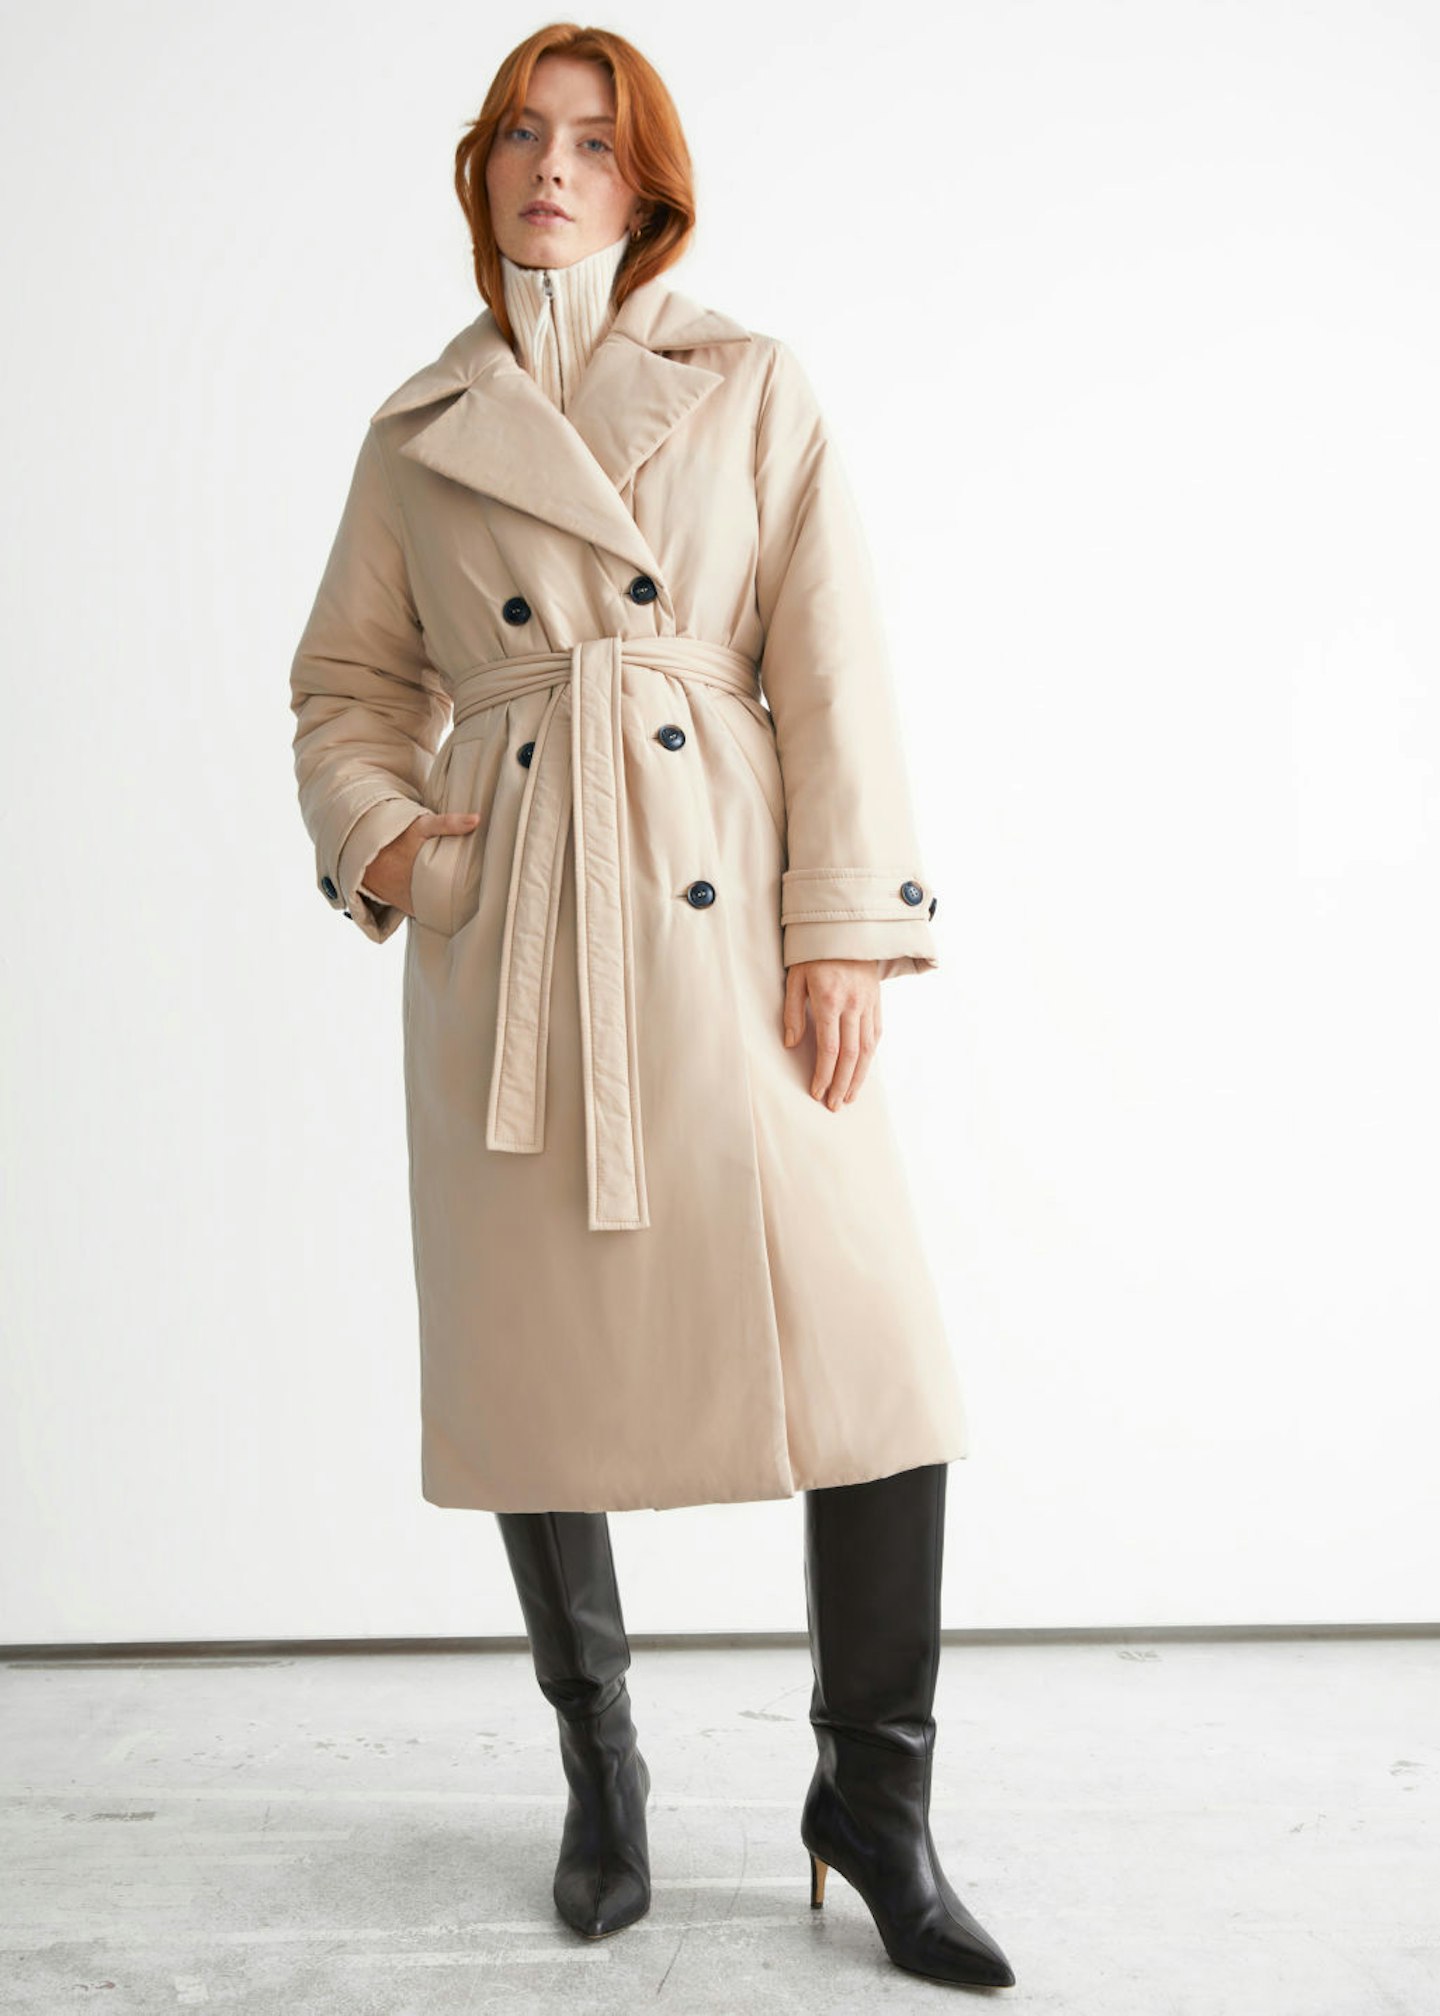 Monday – & Other Stories, Padded Trench Coat, WAS £135 NOW £81